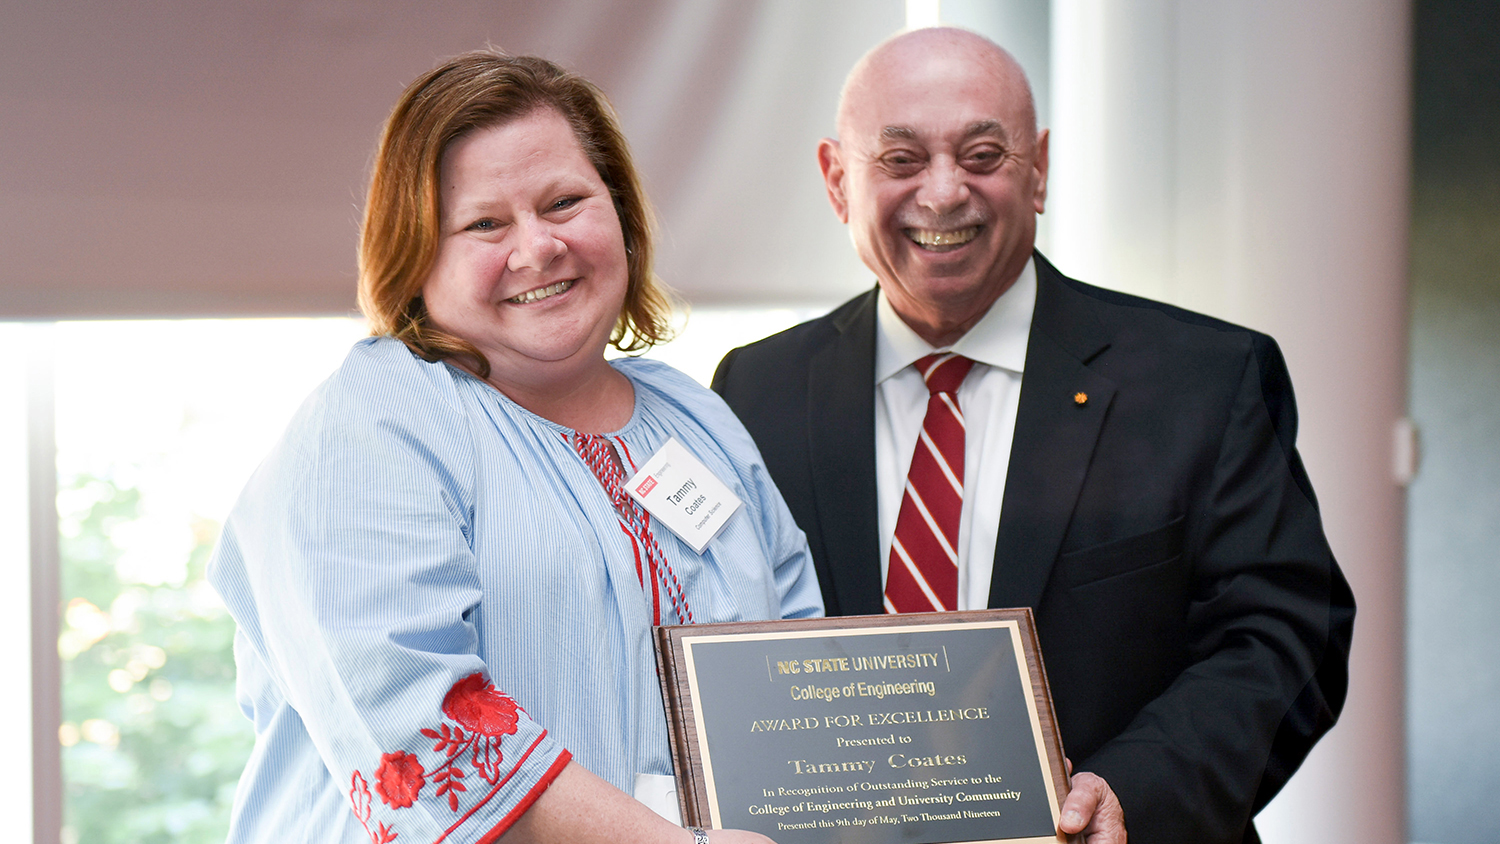 Dr. Louis Martin-Vega, dean of the College of Engineering, presents Award for Excellence to Tammy Coates.